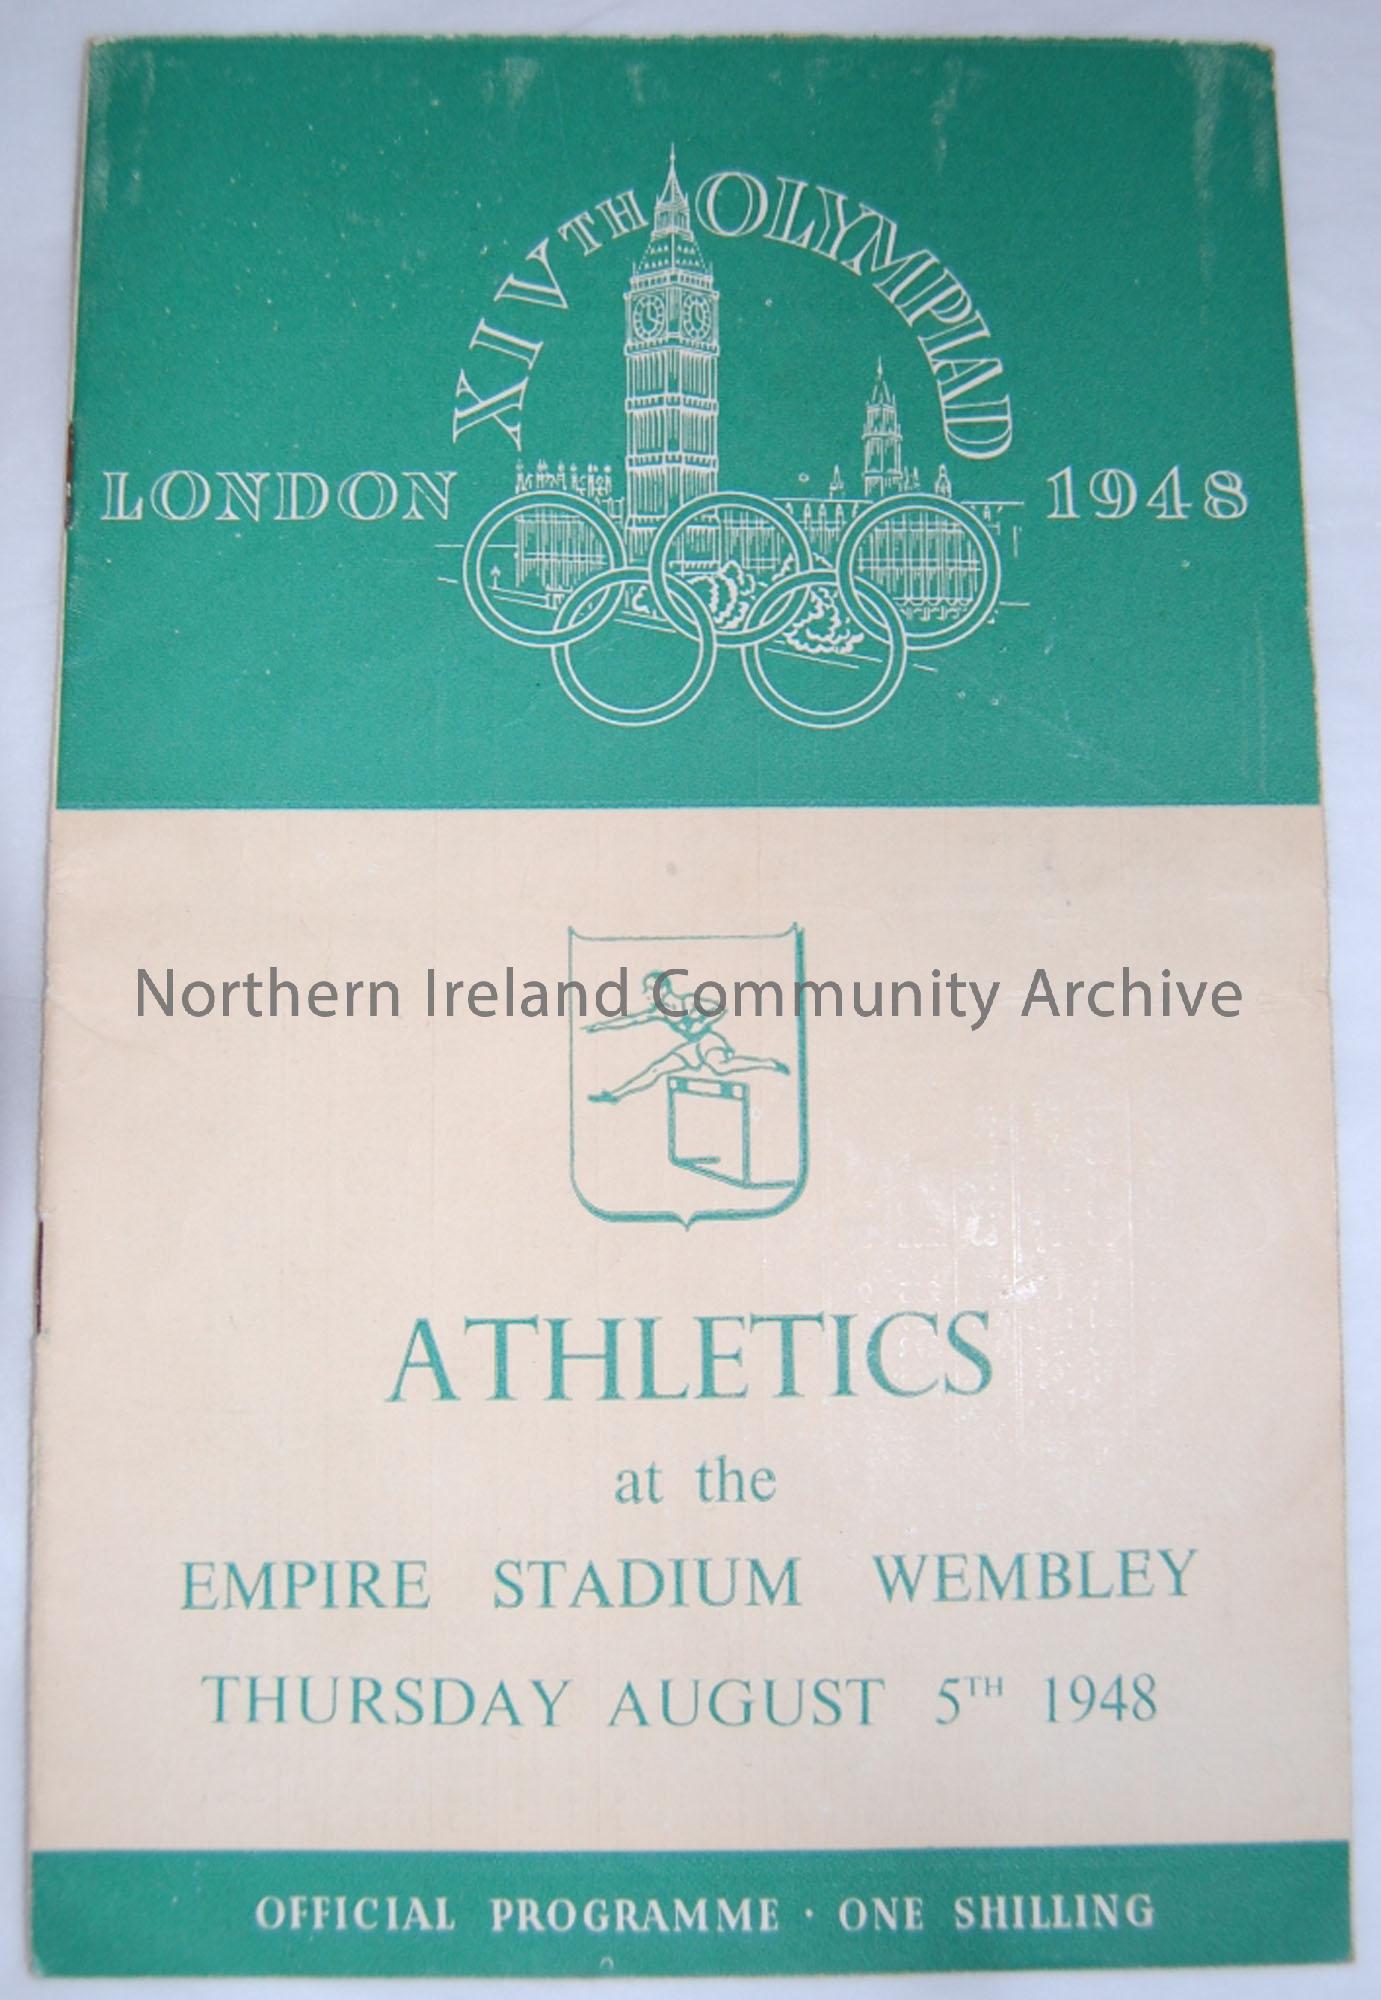 Athletics Programme from London Olympics, Empire Stadium Wembley, Thursday August 5th 1948. Illustrations include Olympic Rings and Houses of Parliame…